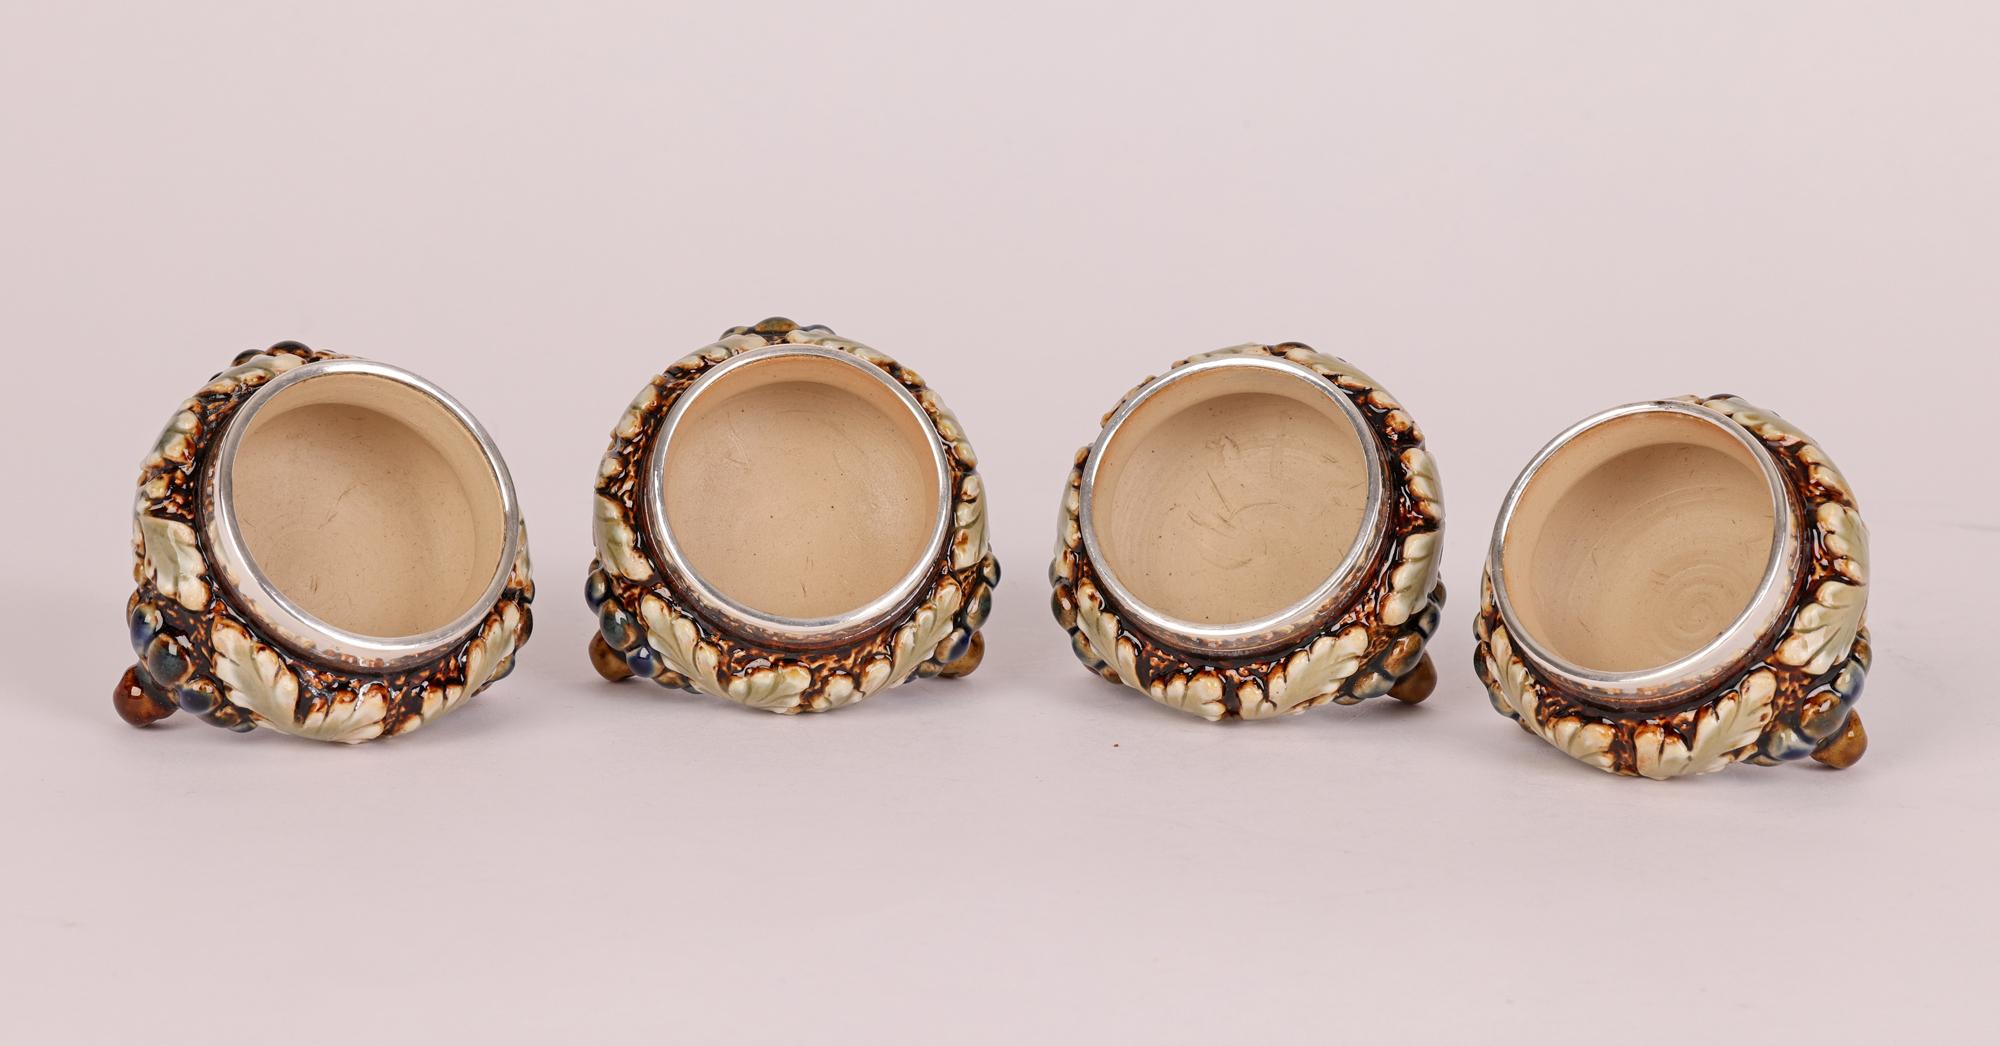 English Elizabeth Atkins for Doulton Lambeth Cased Set of Four Salts and Spoons, 1883